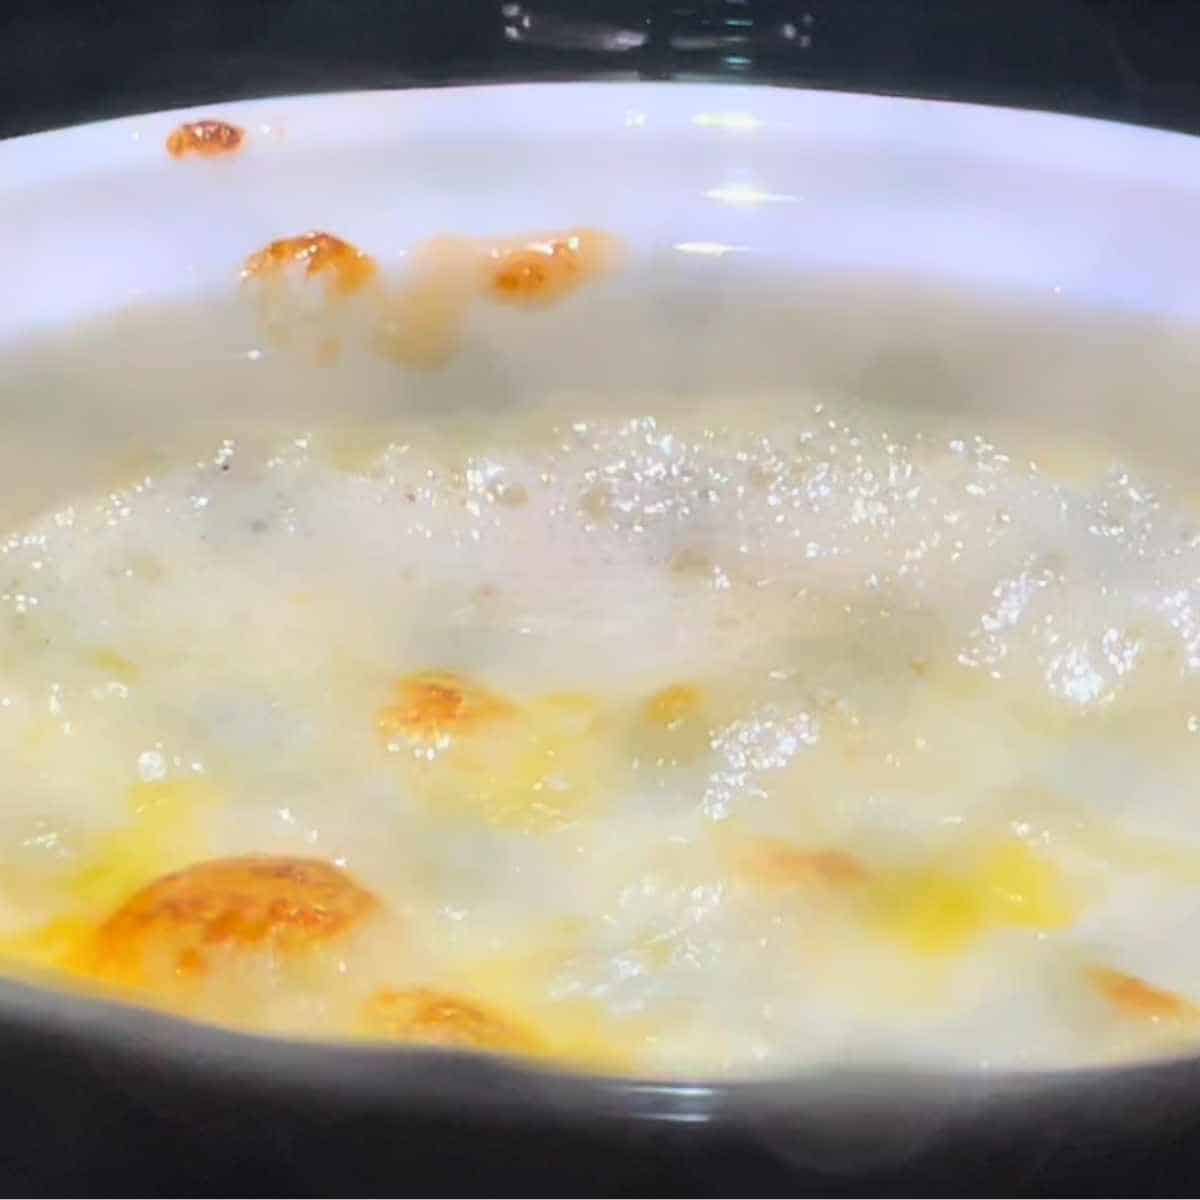 Broil setting for extra crispy cheese top